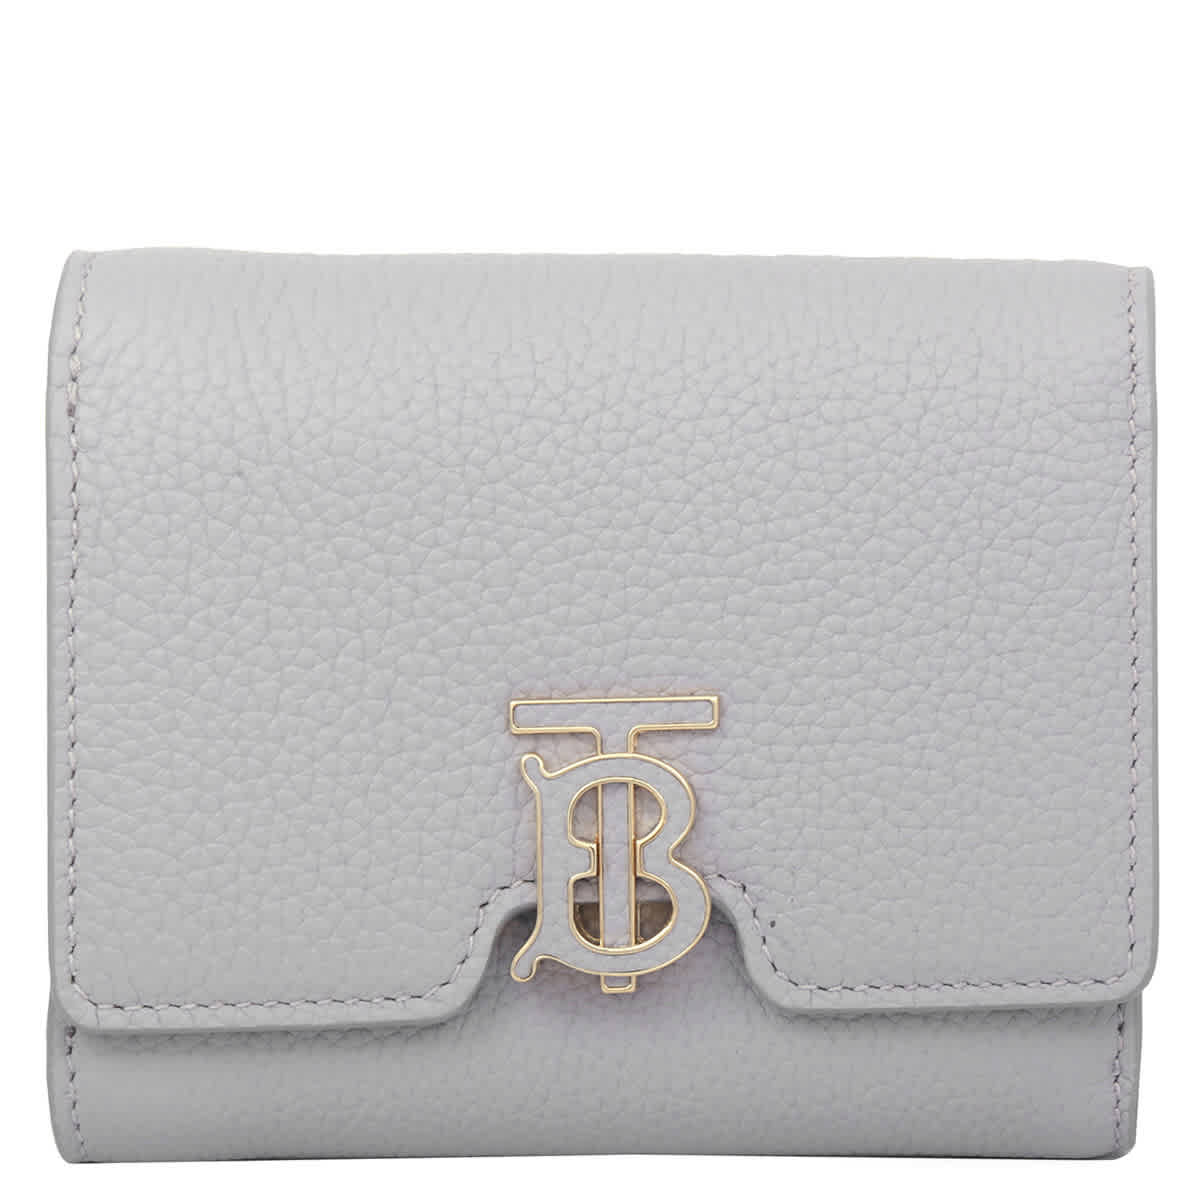 Burberry Grainy Leather Wallet In Light Grey